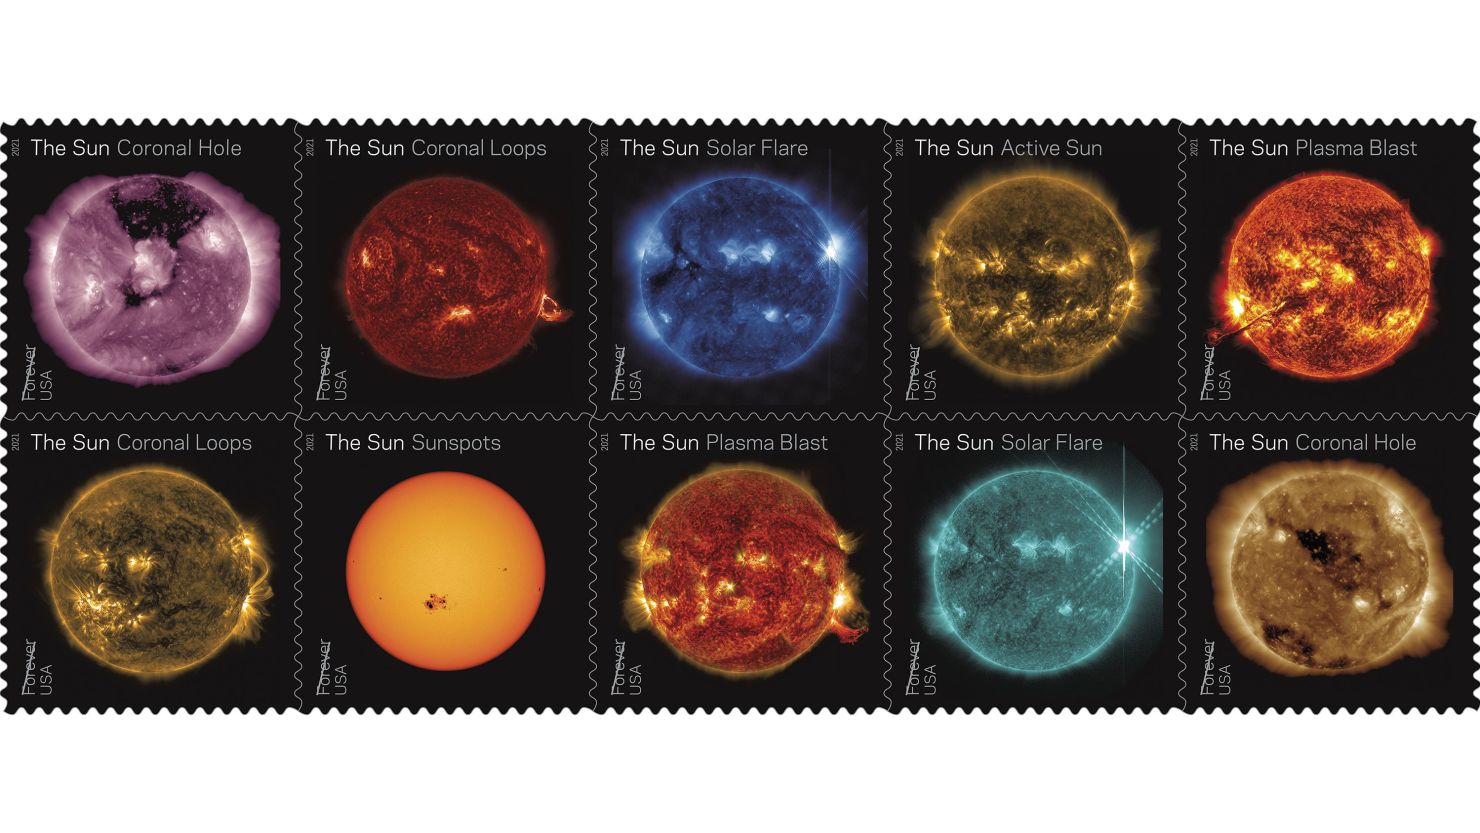 The US Postal Service issued a set of Sun stamps on Friday.